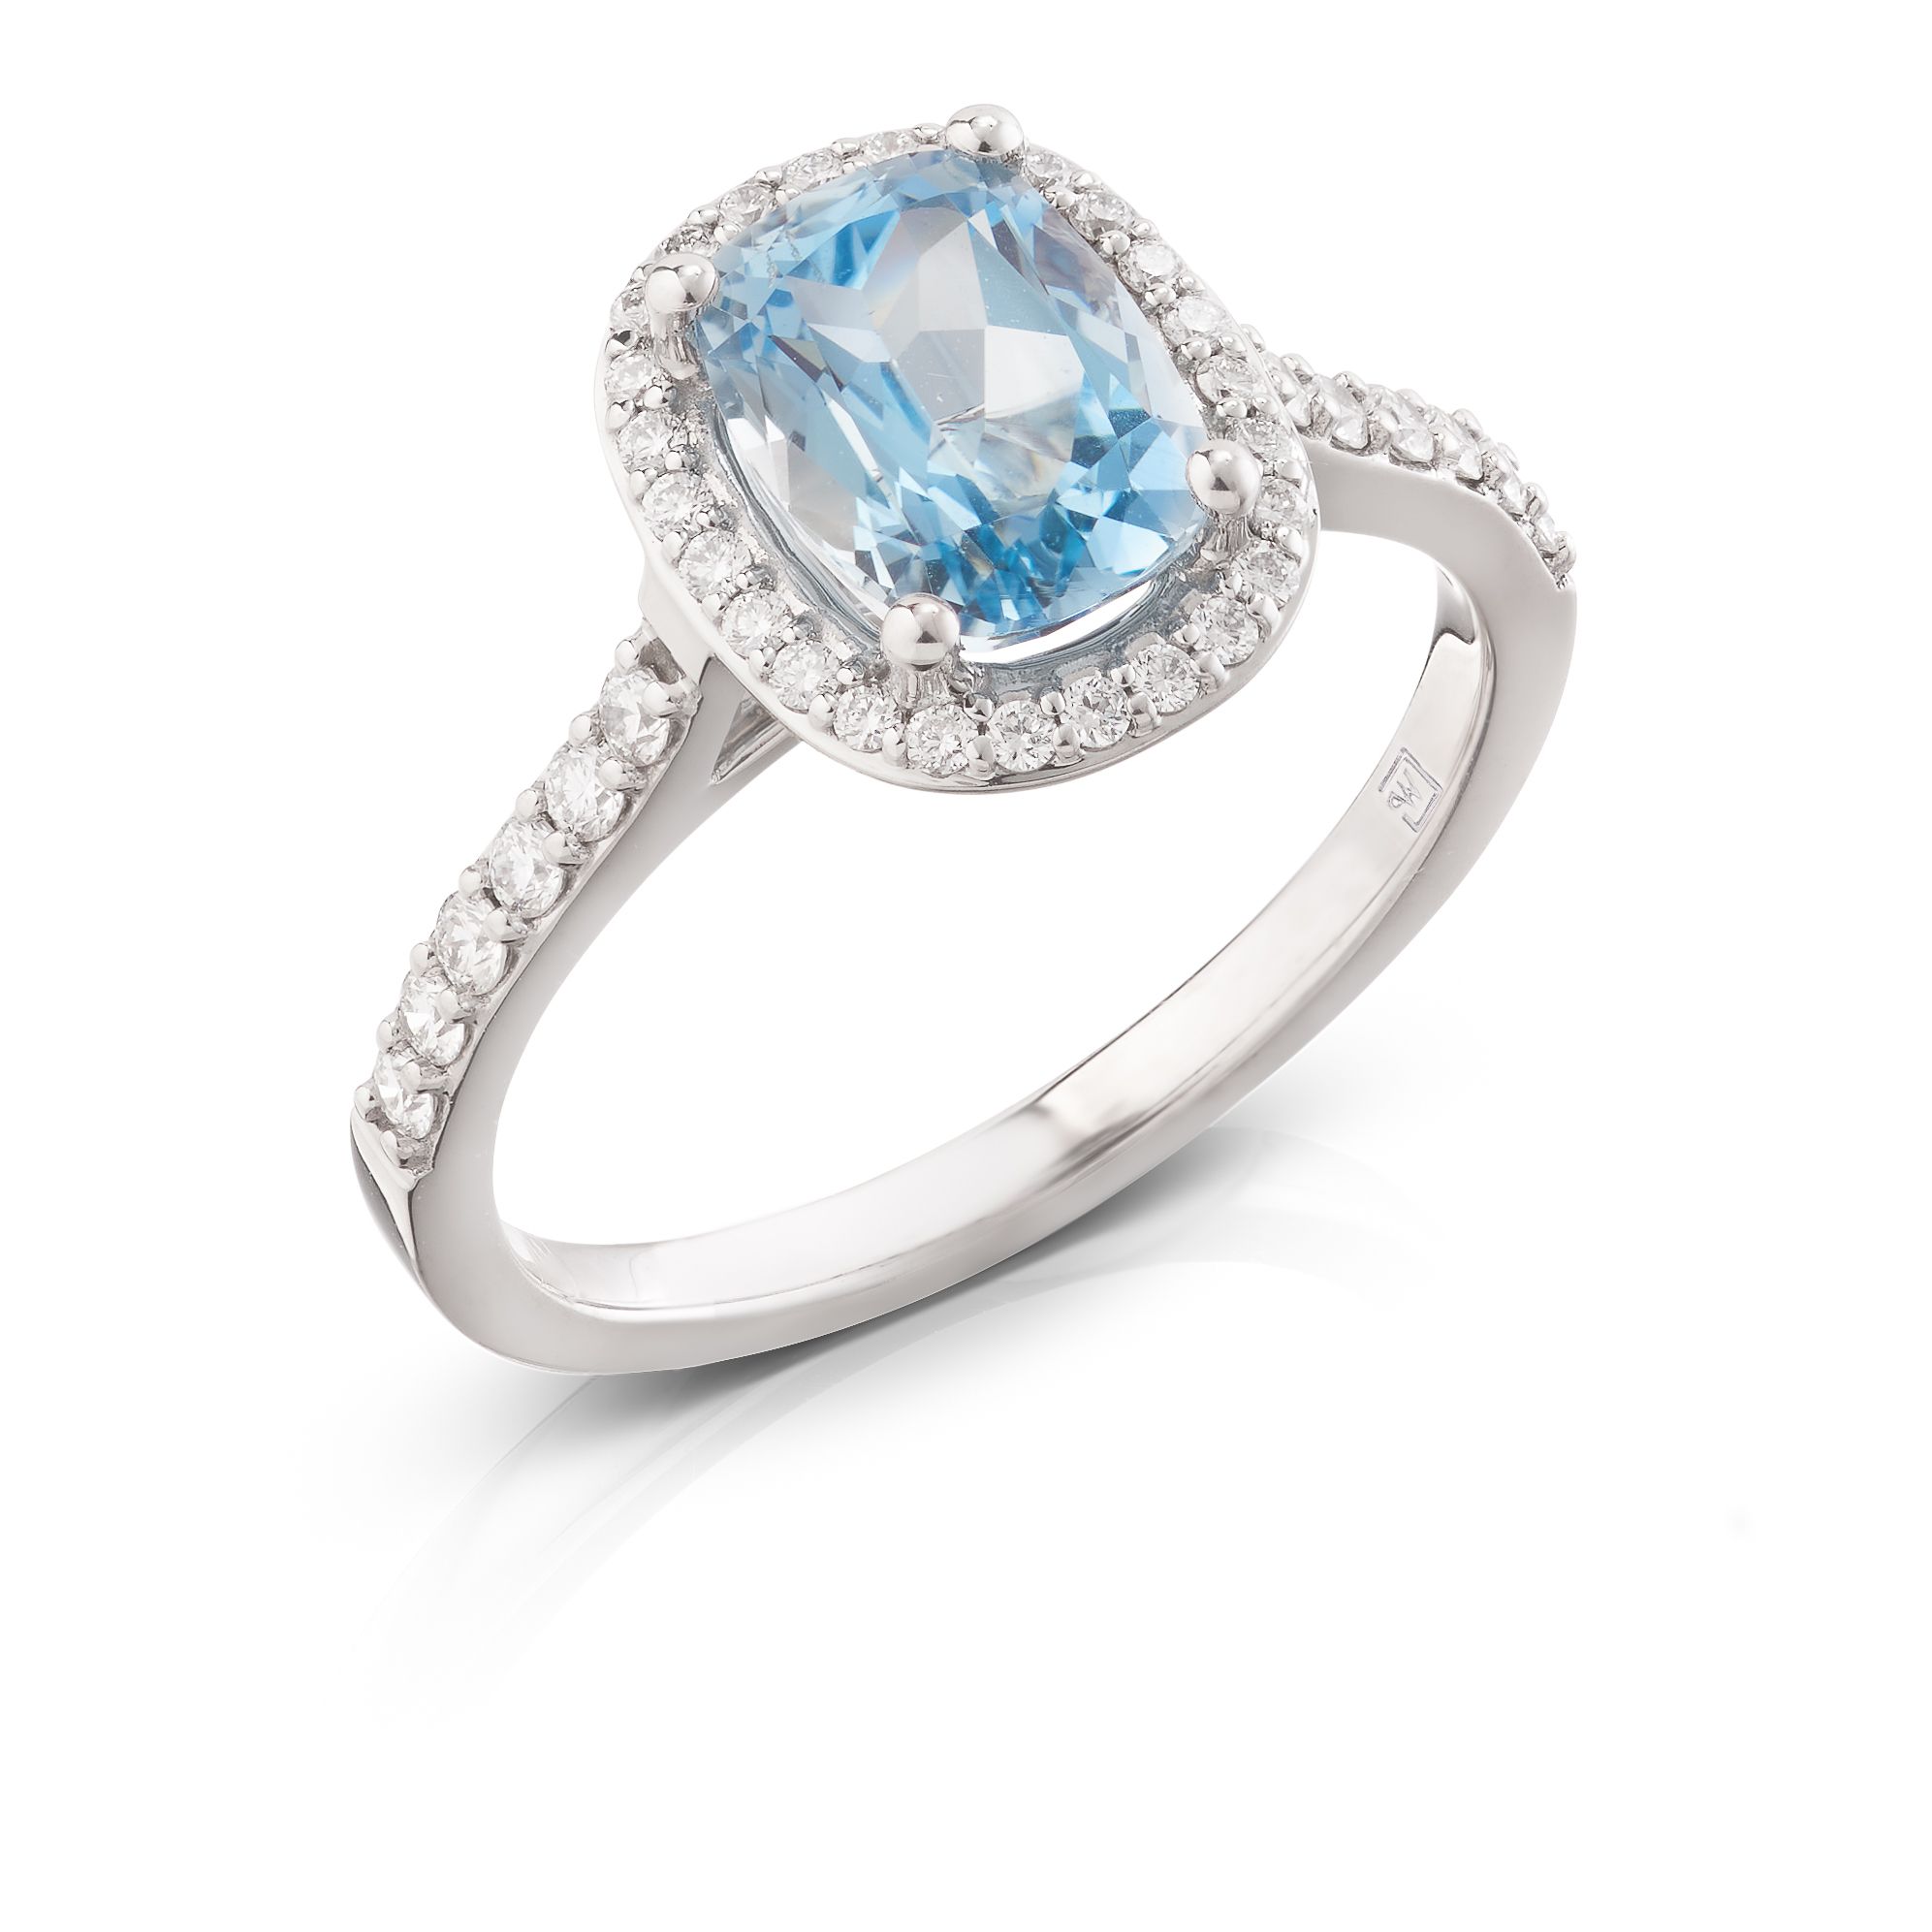 18ct White Gold Custom Made Halo Ring With One Cushion Cut Aquamarine And  Round Diamond Halo And Band (View 4 of 25)